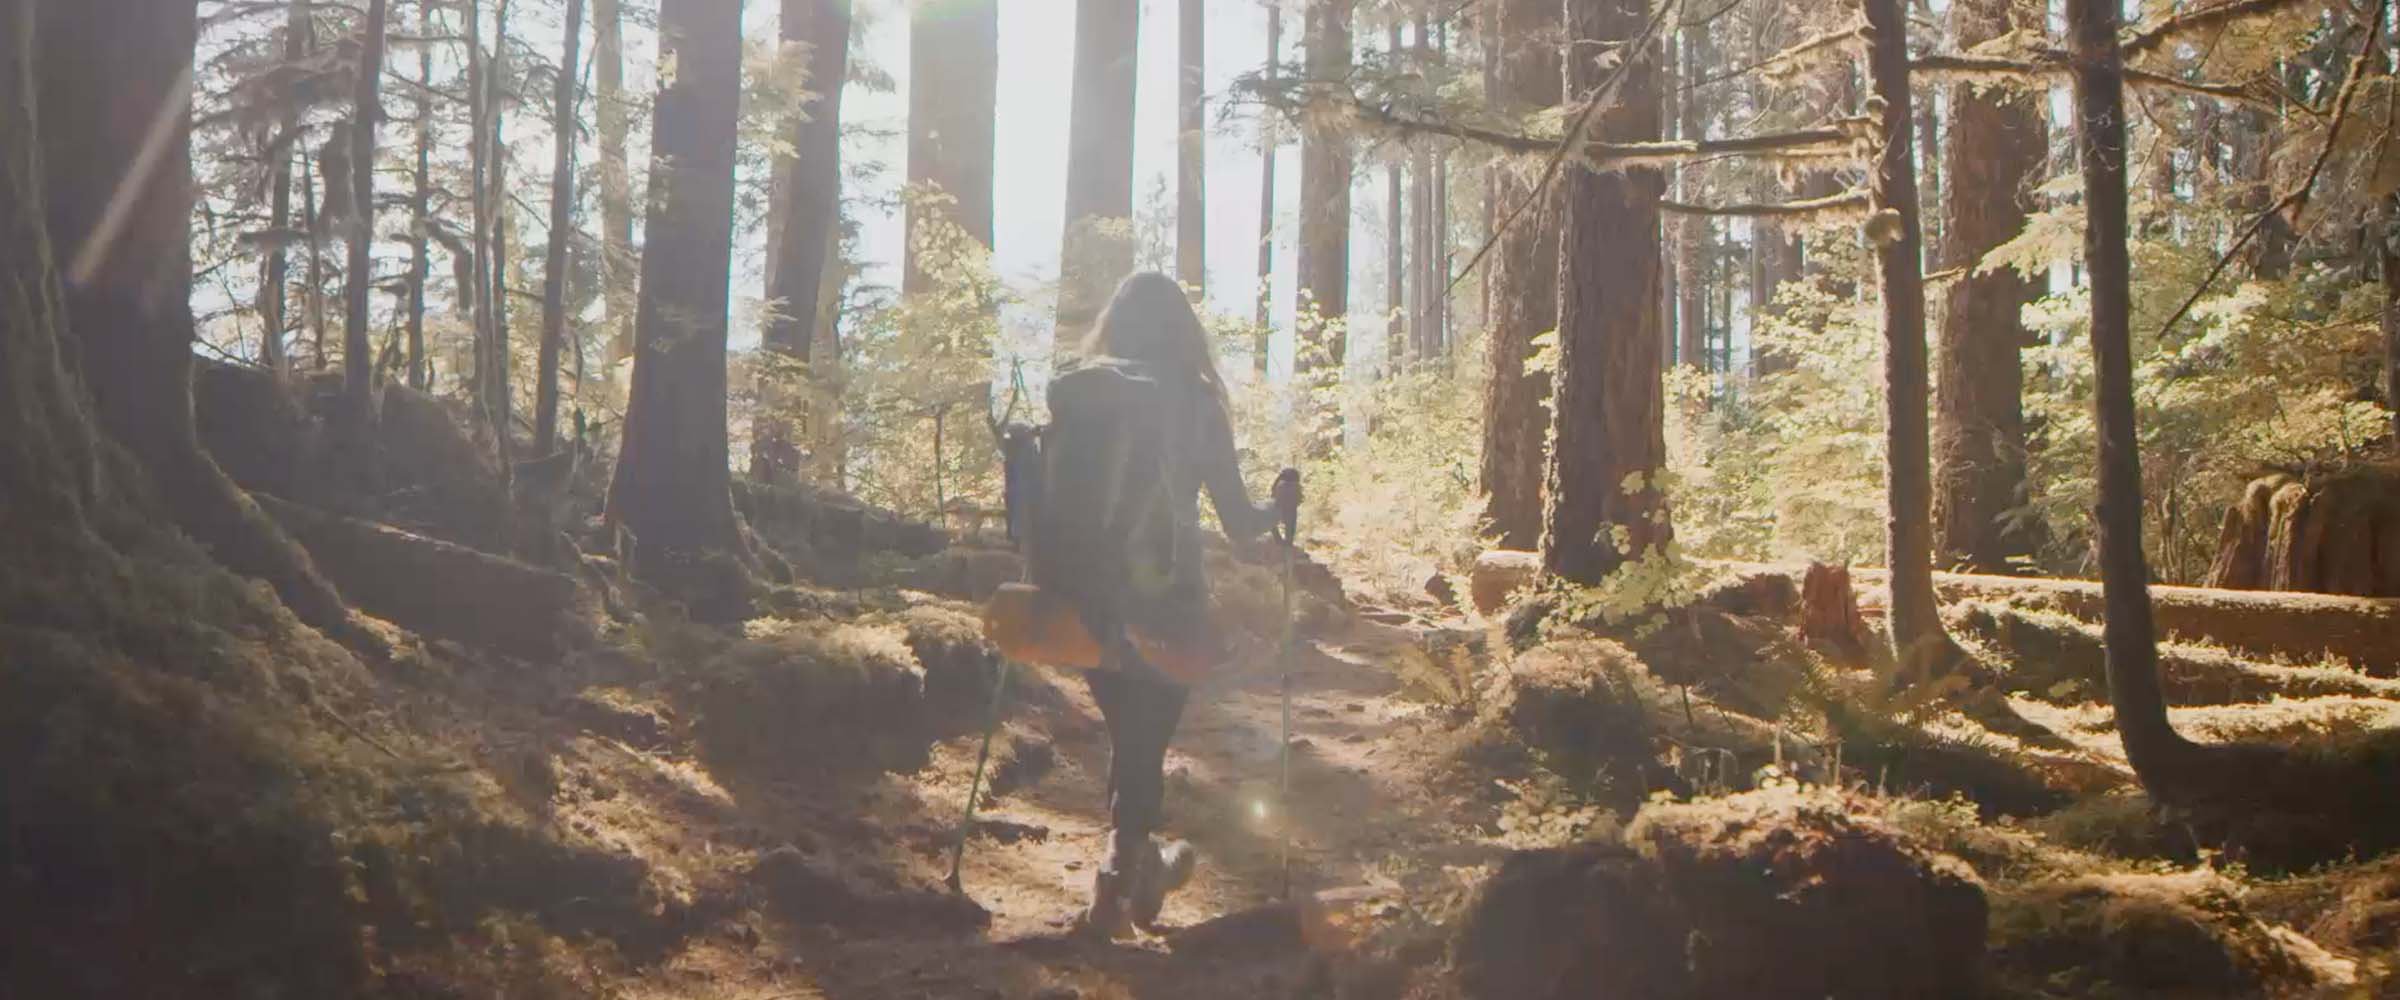 women with hiking gear in the woods